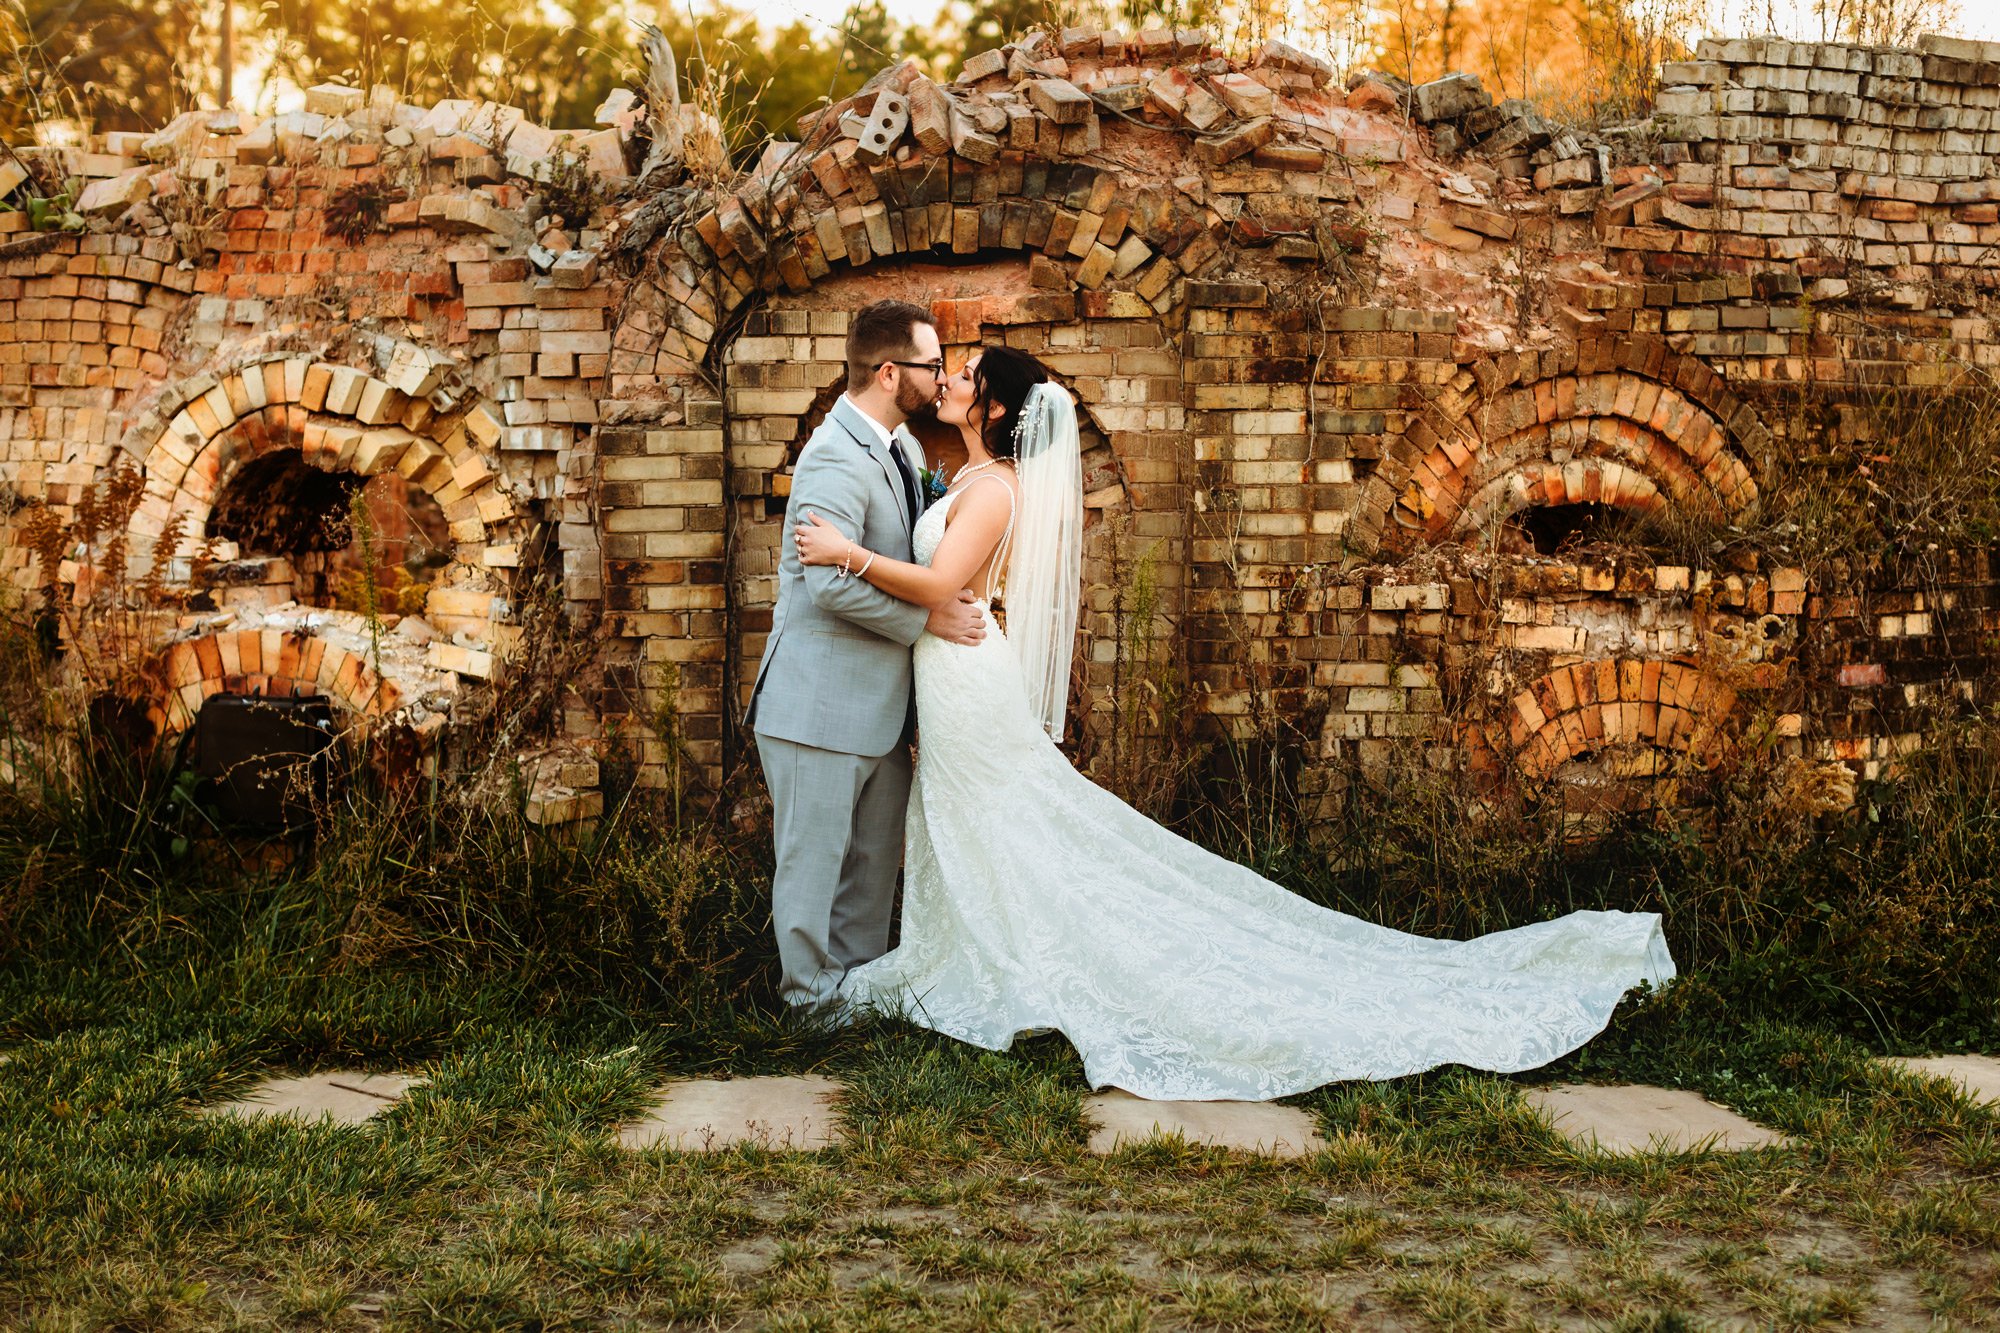  In a romantic location the bride and groom kiss with a moody edit by Teala Ward Photography. wedding inspo fall #TealaWardPhotography #TealaWardWeddings #WeddingLocationsIllinois #IllinoisWedding #weddingdetails #weddingphotography #married 